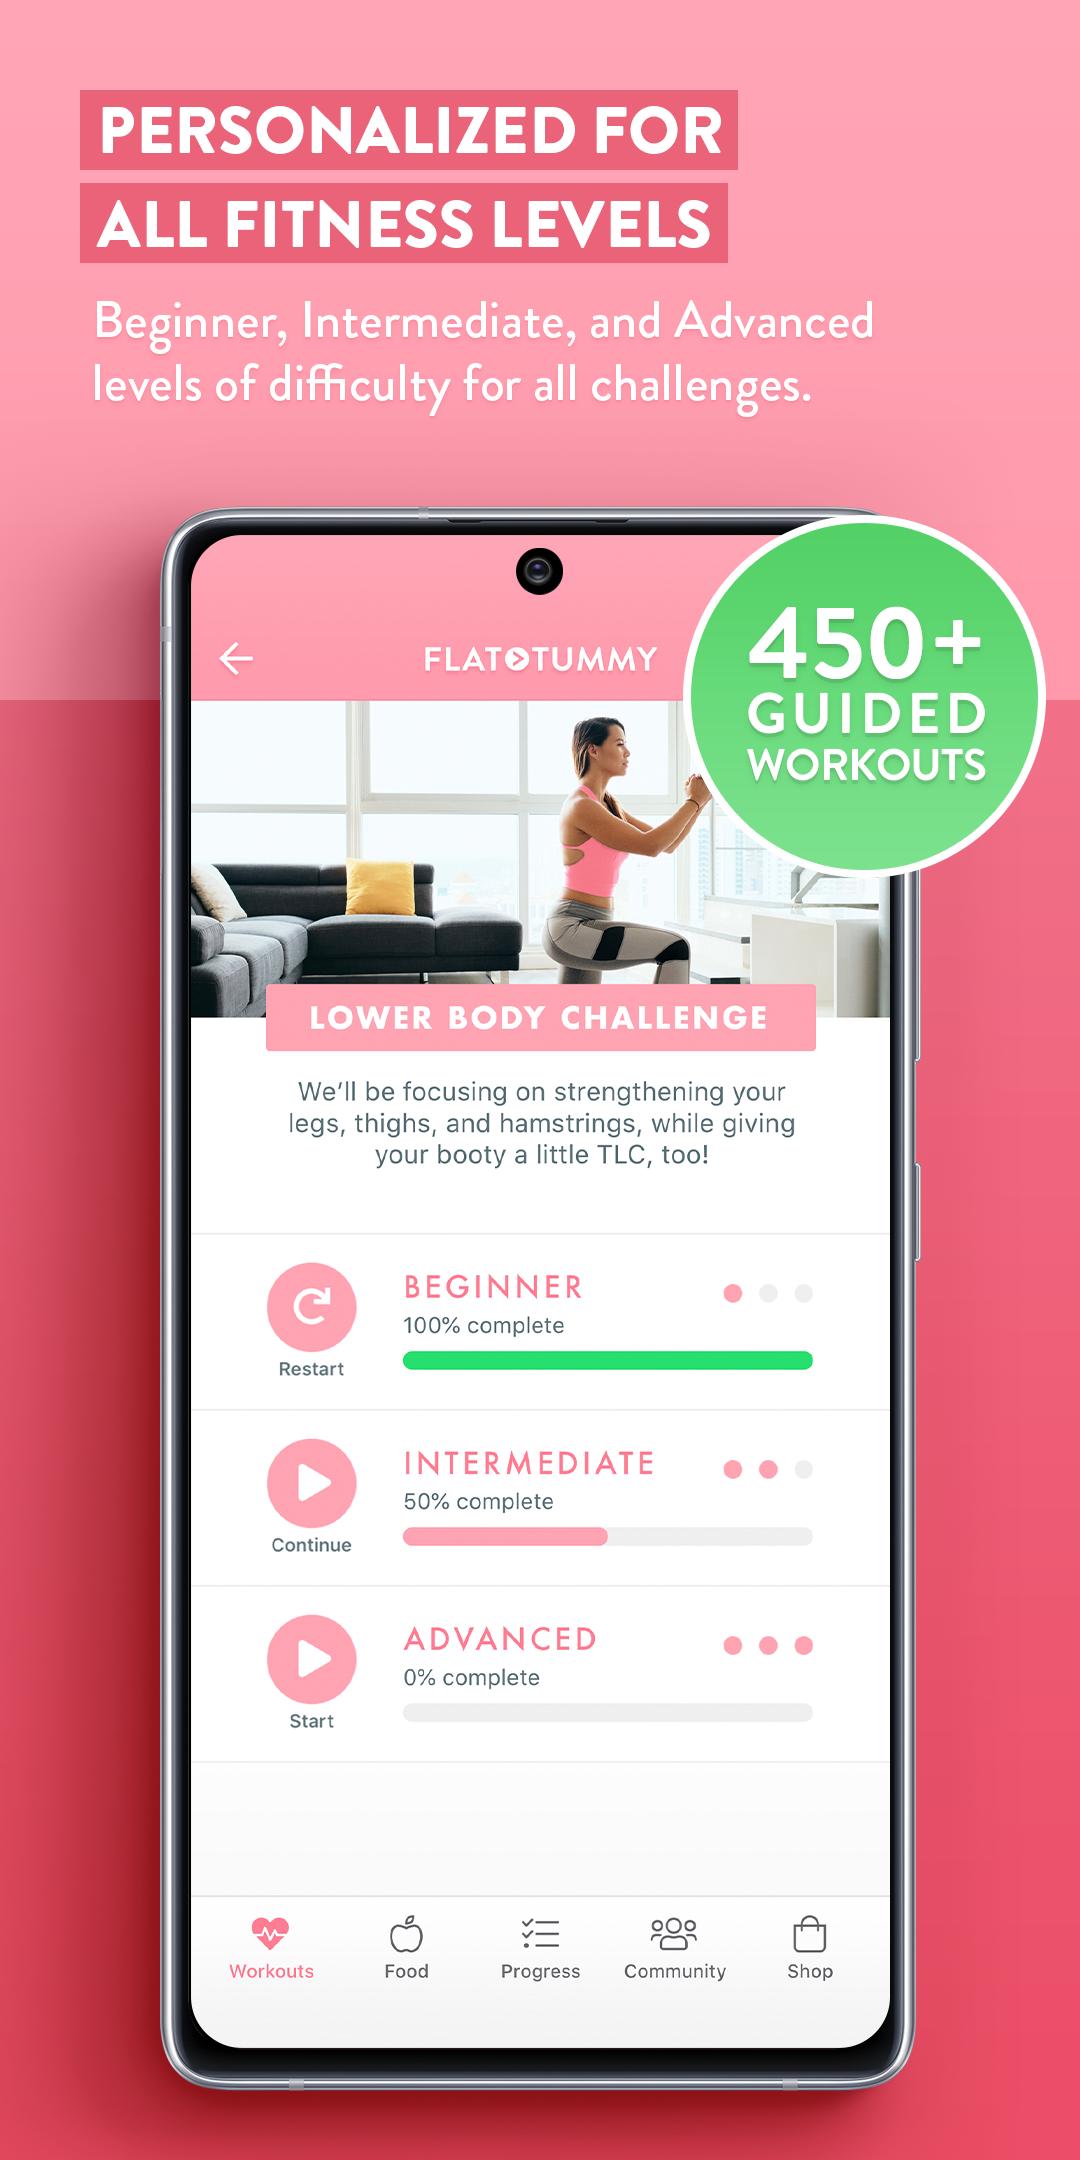 30 Minute Home Workout App Download Apk for Women